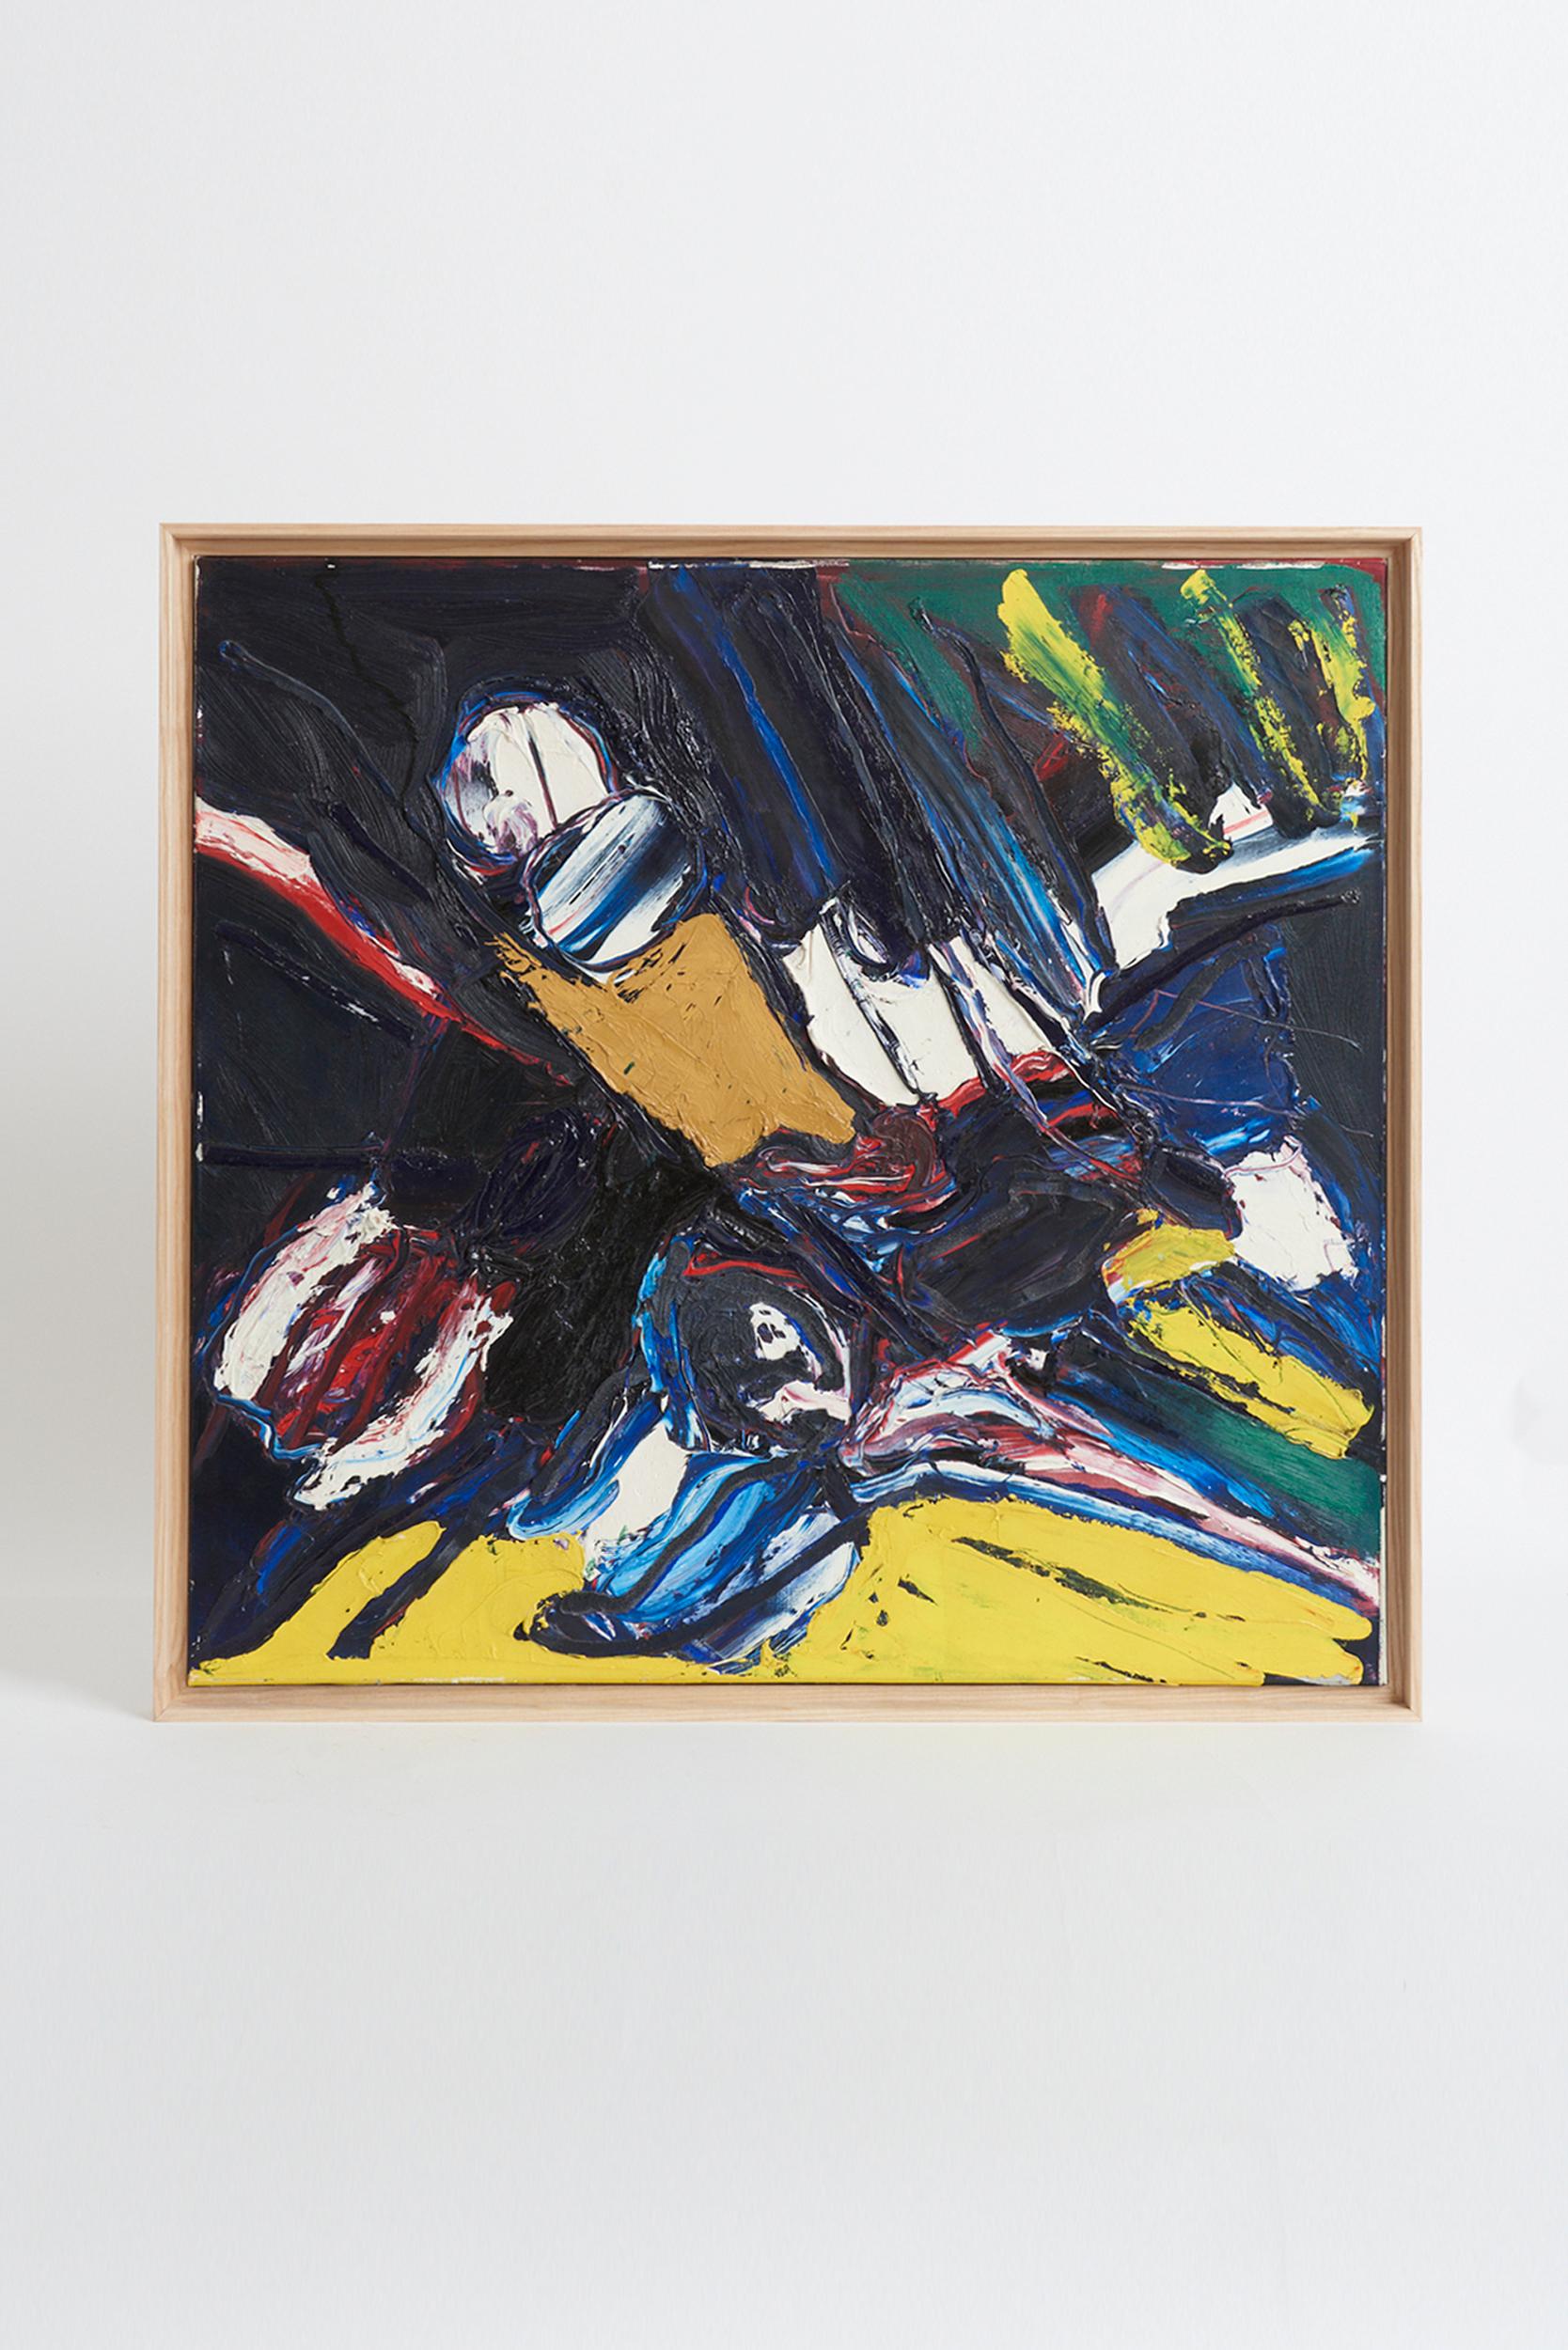 Abstract painting by Bengt Åberg (1941-2015)
Oil on canvas
74 cm high by 77 cm wide by 3.5 cm depth